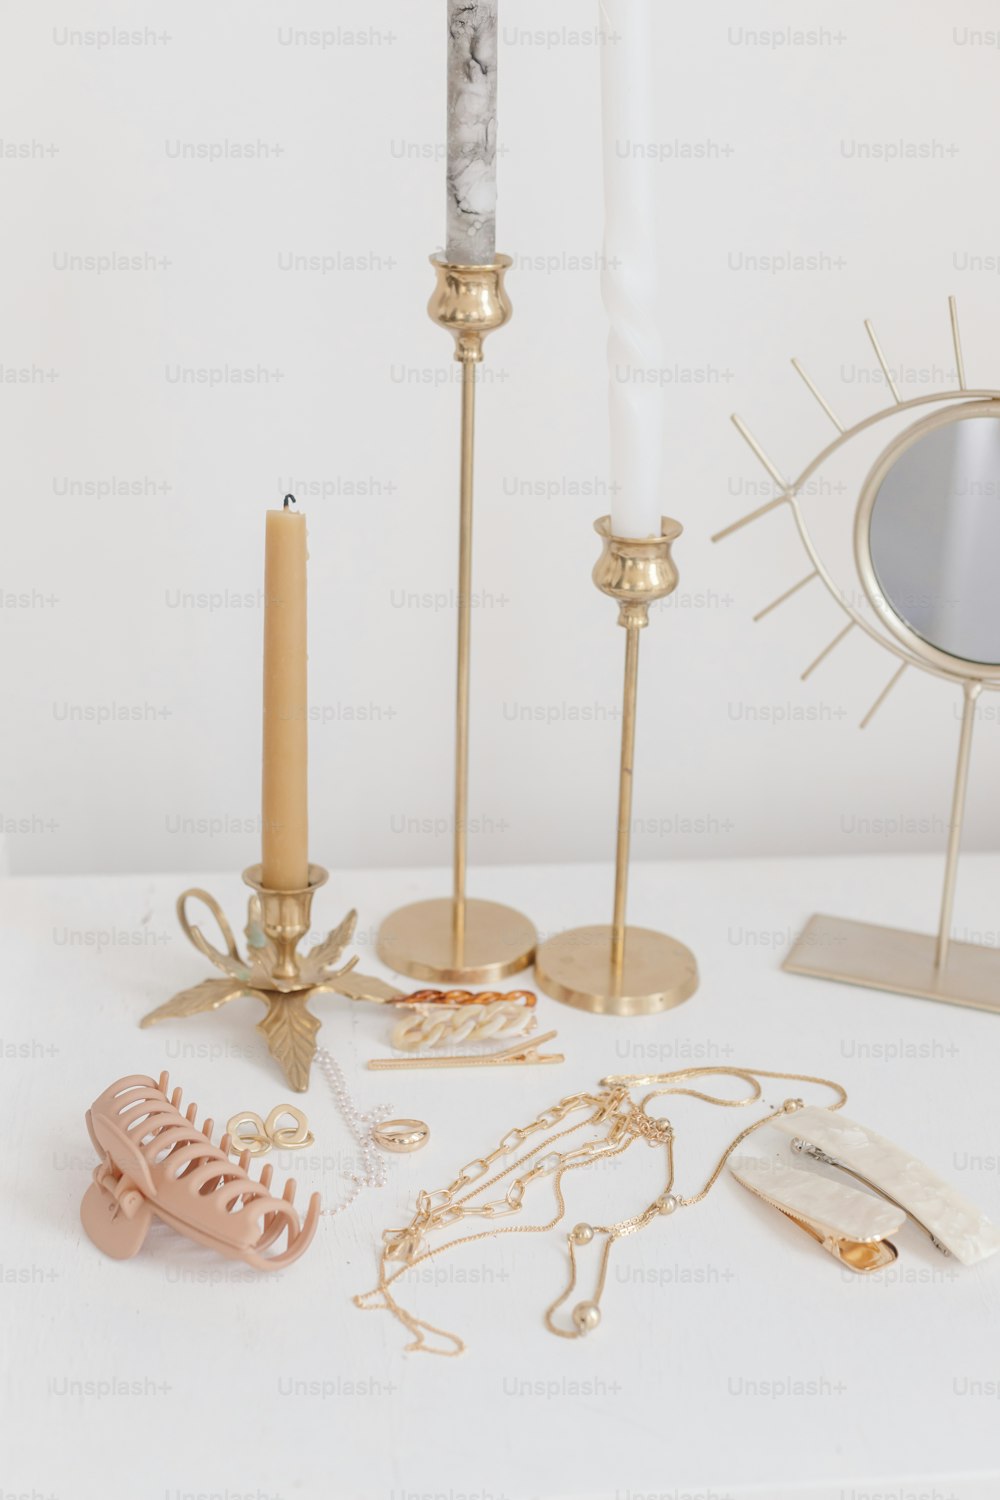 Boho accessories, interior details. Modern golden jewellery, hair clips on white table with vintage candles and boho mirror. Stylish gold ring, chain necklace, earrings, hairpins and barrettes.